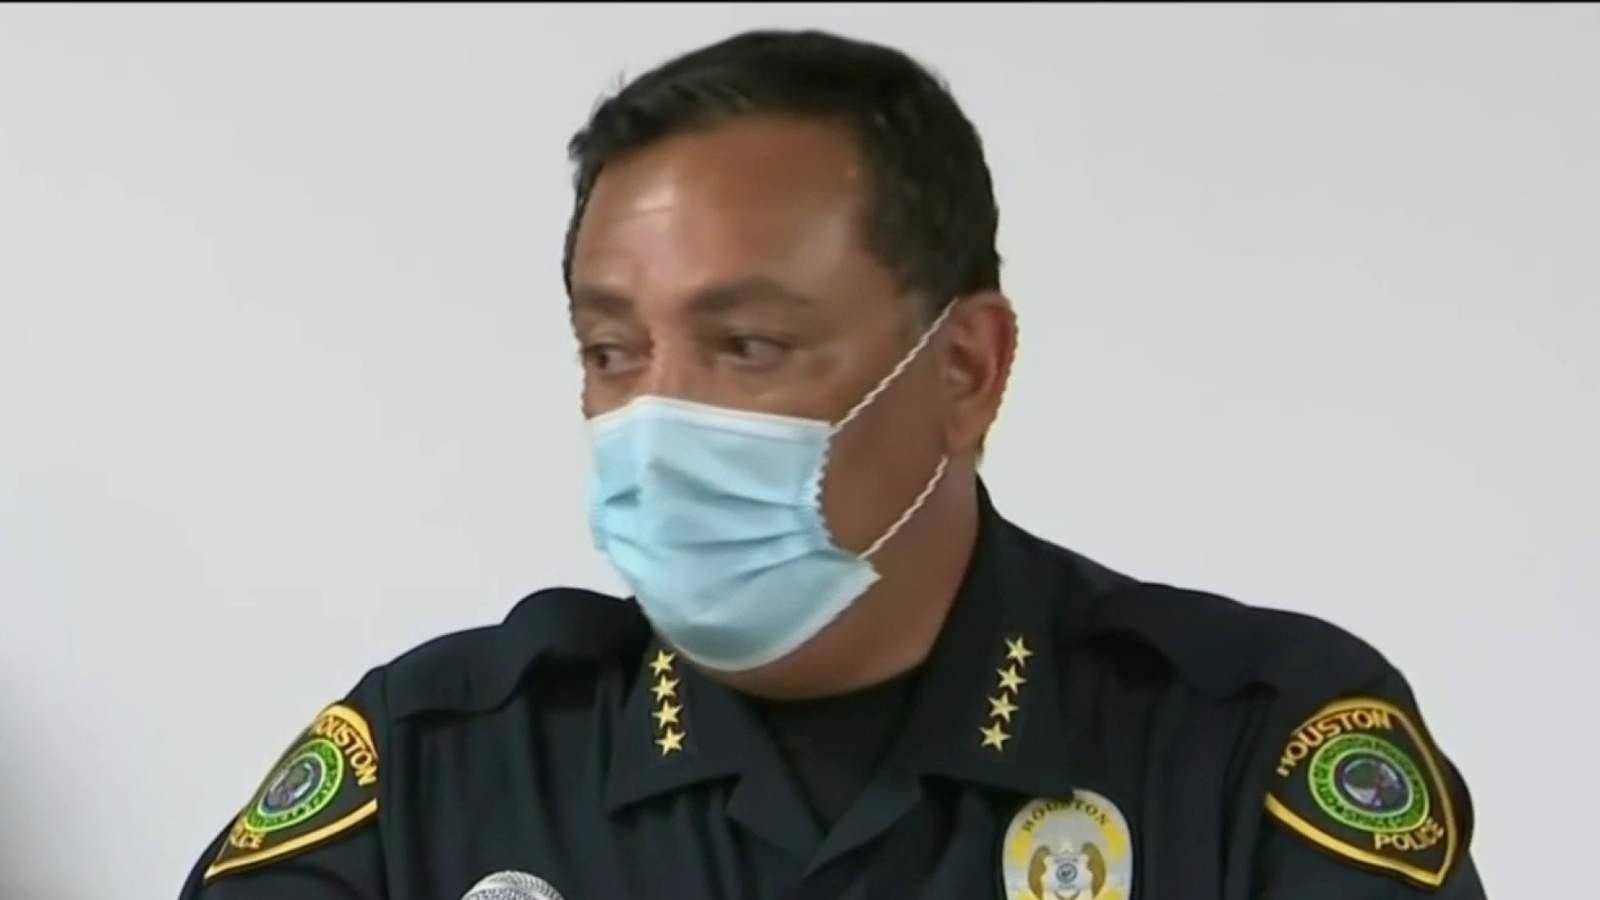 HPD Chief Art Acevedo gets final send-off as he departs to Miami